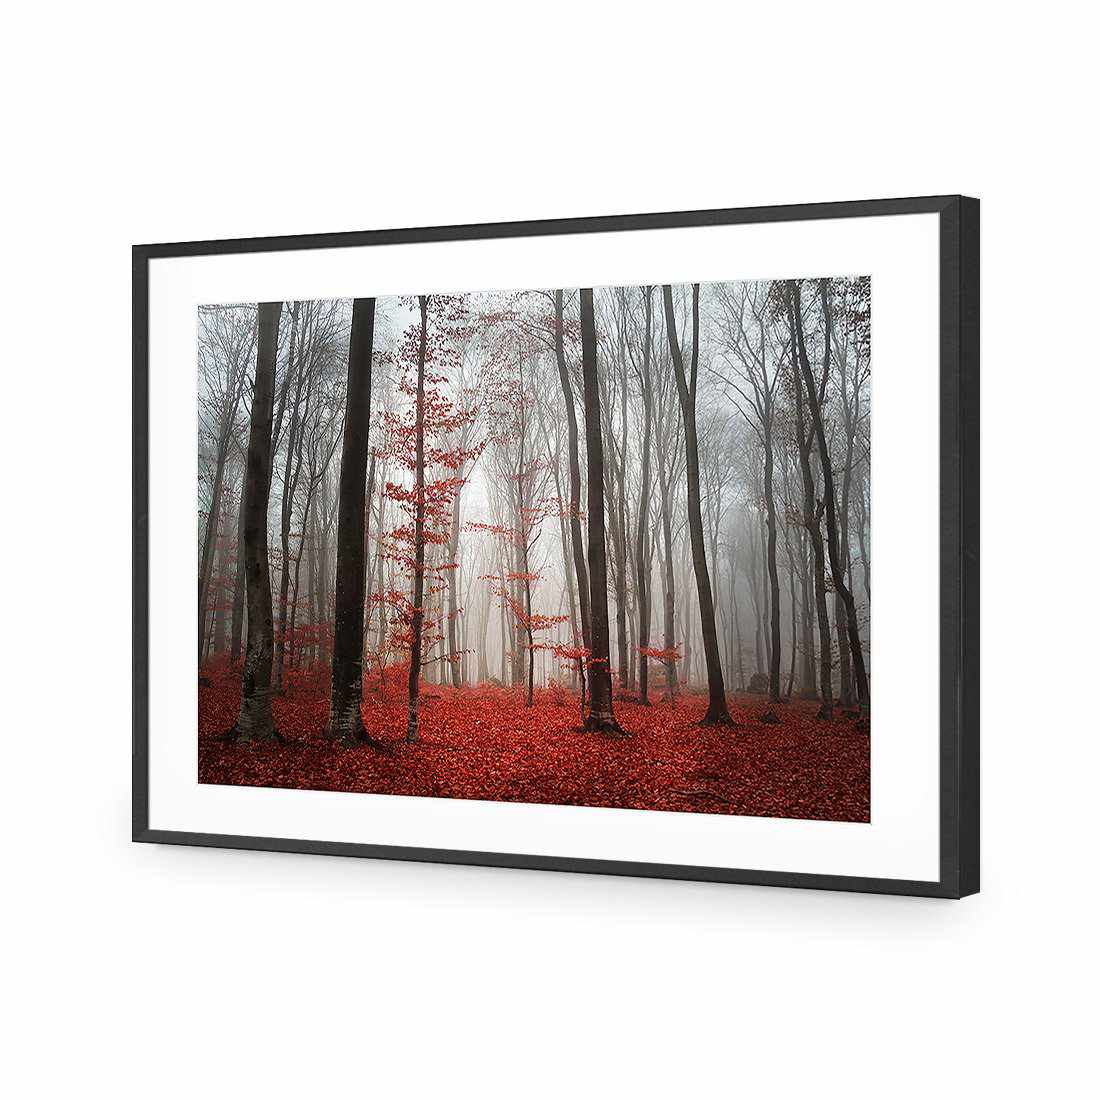 Scarlet Forest-Acrylic-Wall Art Design-With Border-Acrylic - Black Frame-45x30cm-Wall Art Designs